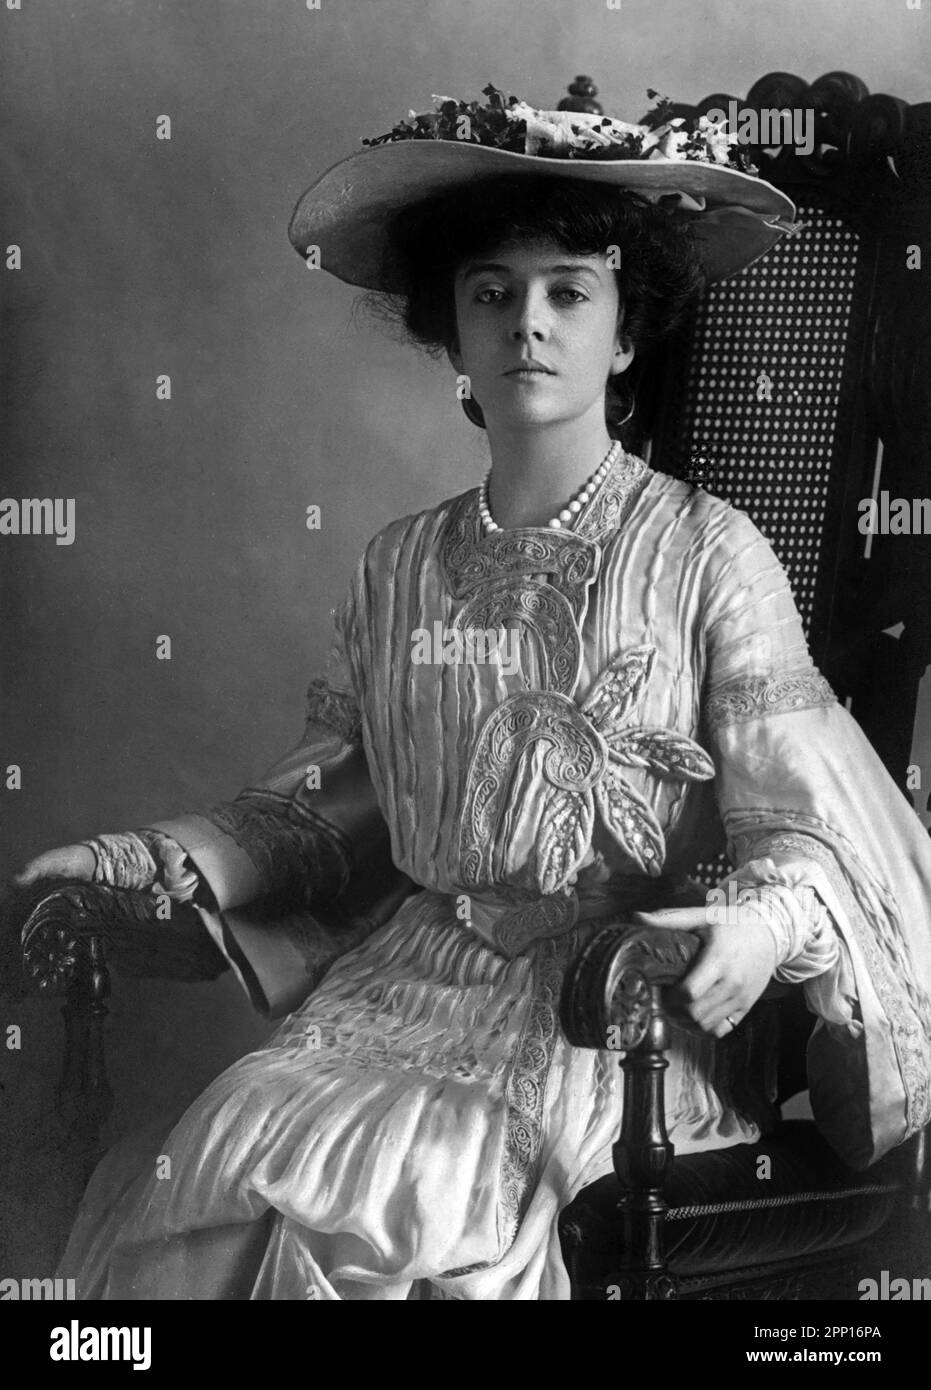 Alice Roosevelt Longworth. Portrait of the American socialite and writer, Alice Lee Roosevelt Longworth (1884-1980) by Pach Brothers Studio, 1904. Longworth was the eldest daughter of President Theodore Roosevelt. Stock Photo